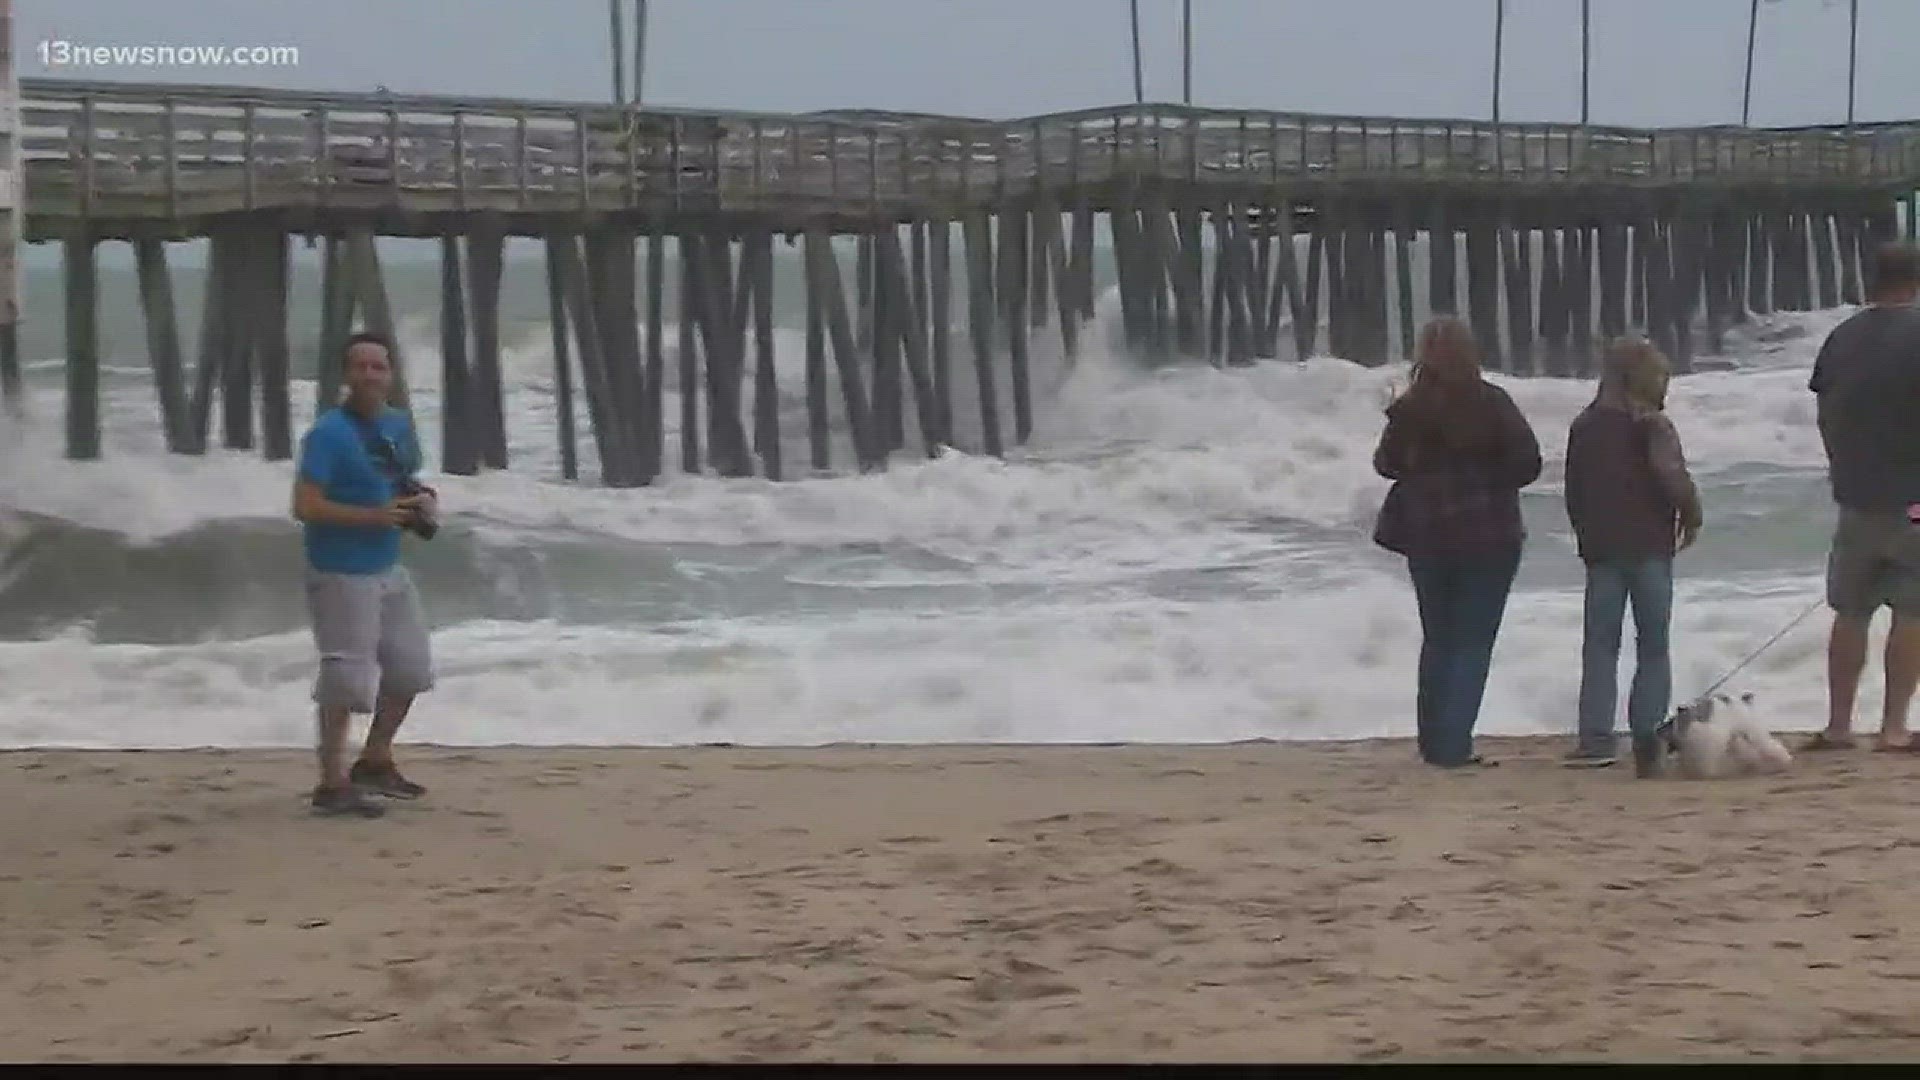 Tourists were still at the oceanfront in Virginia Beach regardless of Hurricane Florence